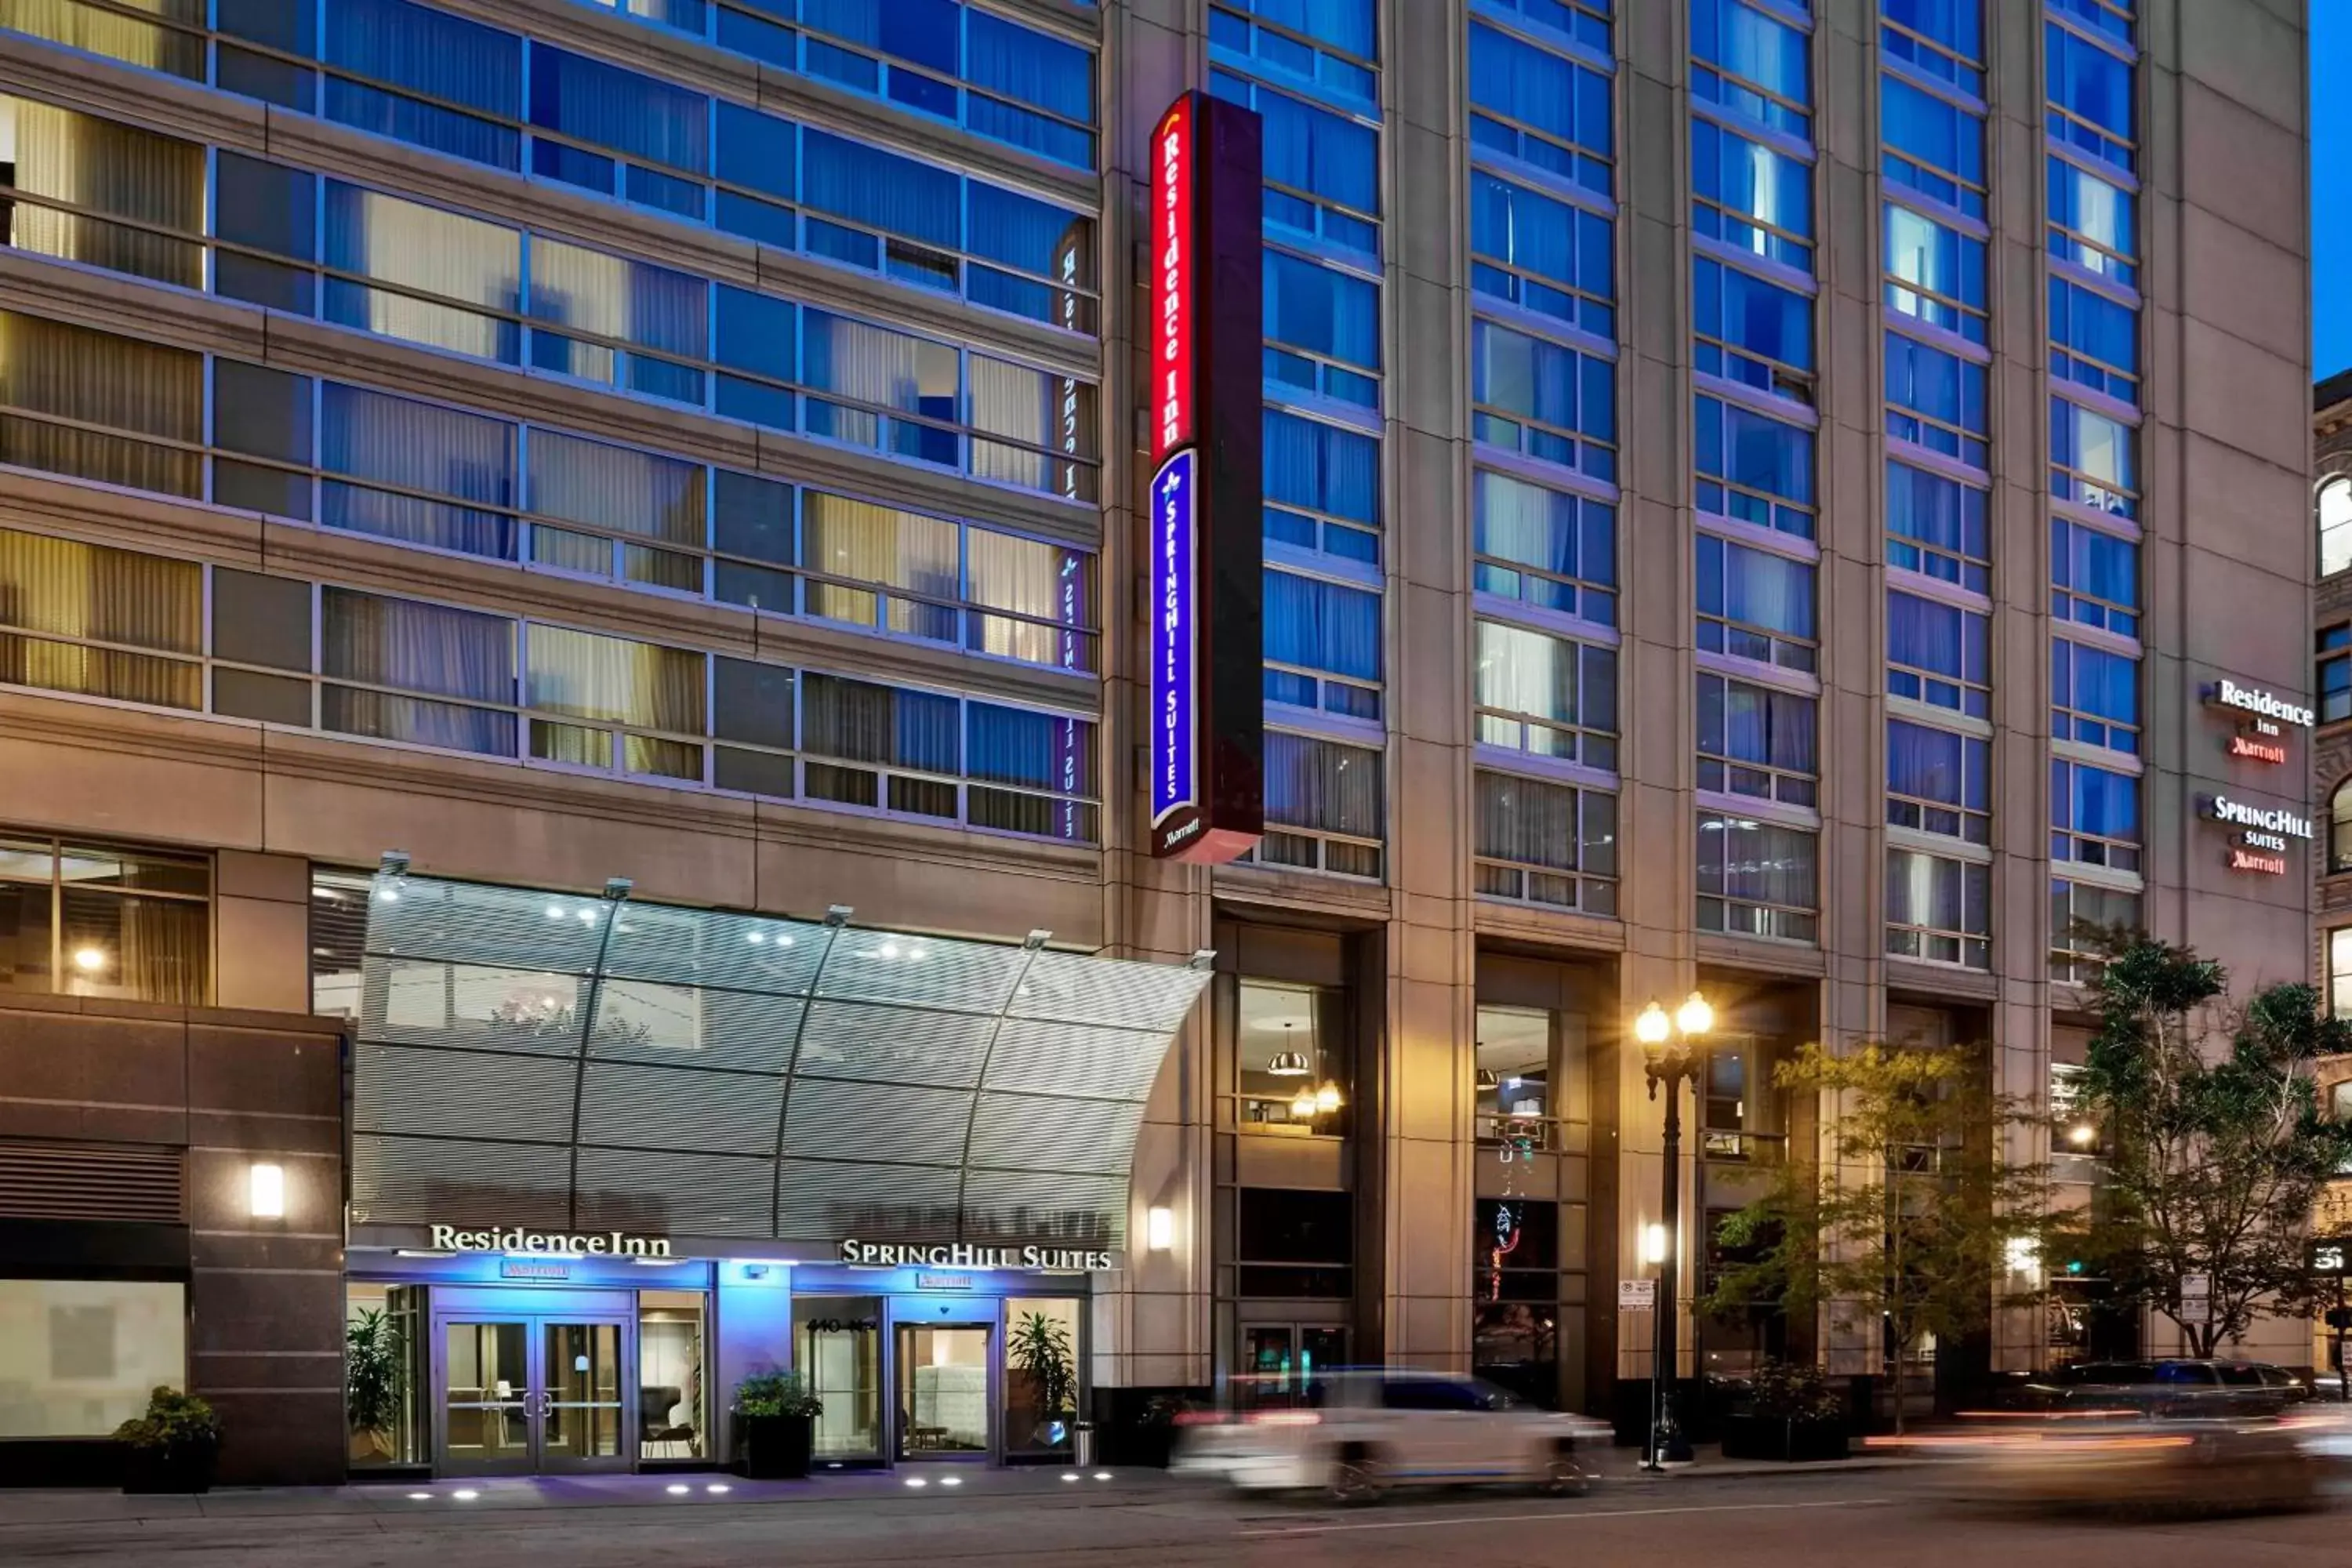 Property Building in Residence Inn by Marriott Chicago Downtown/River North